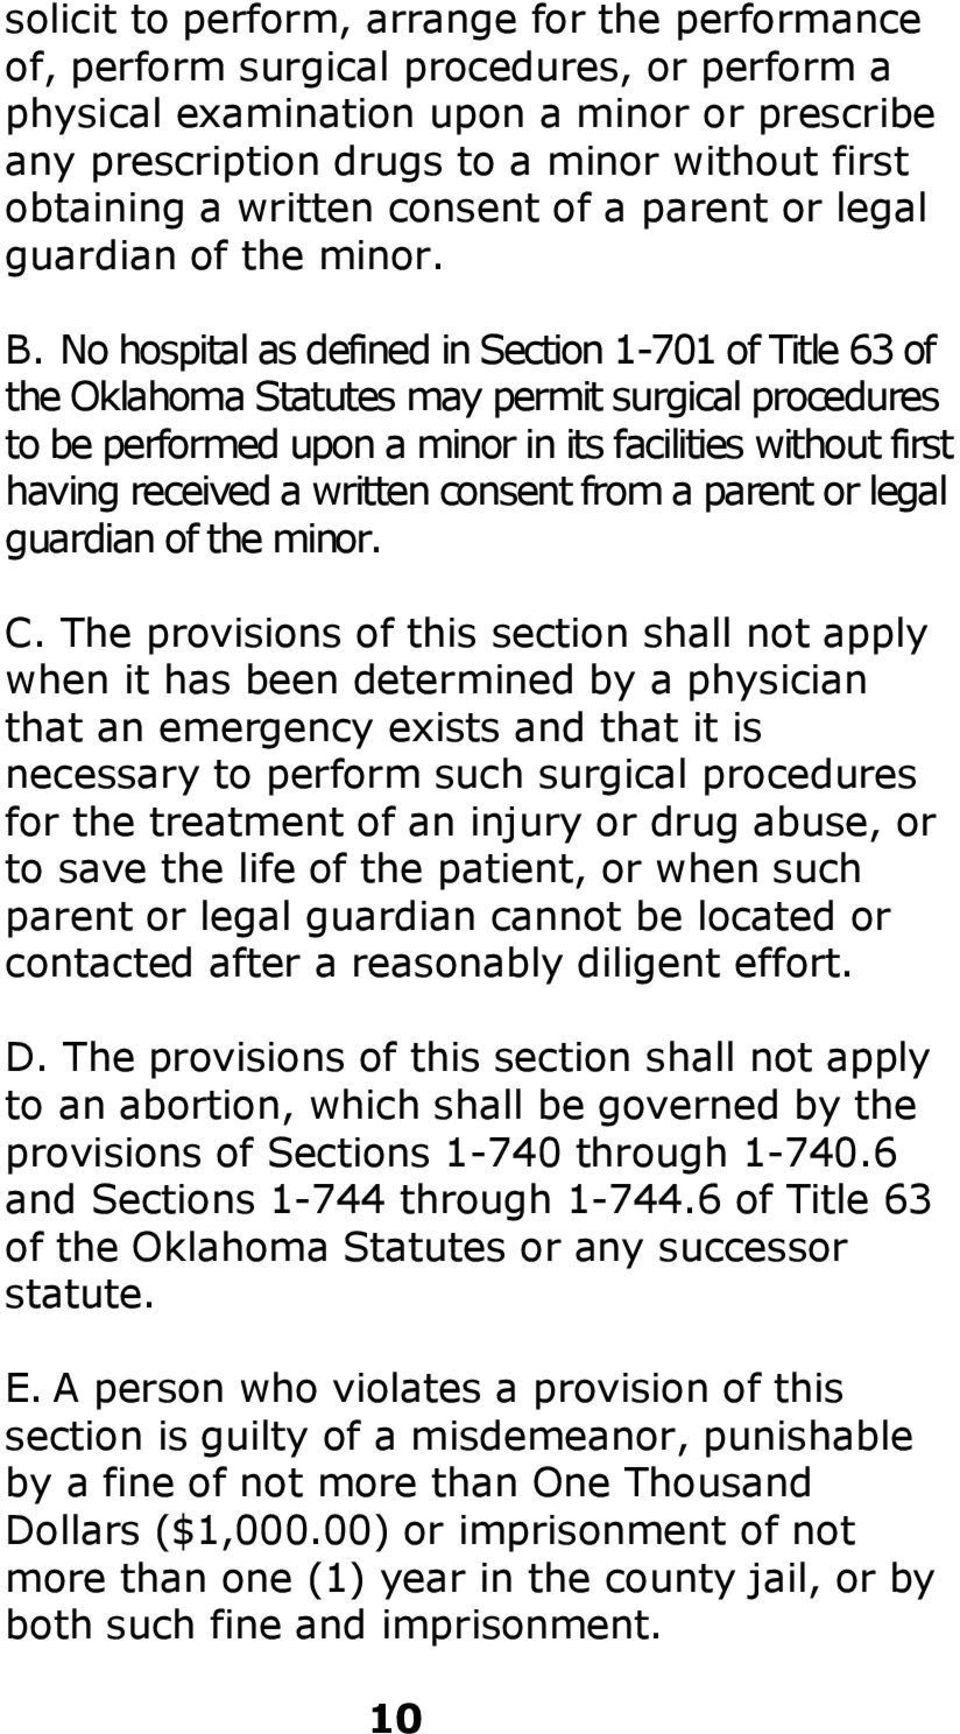 No hospital as defined in Section 1-701 of Title 63 of the Oklahoma Statutes may permit surgical procedures to be performed upon a minor in its facilities without first having received a written